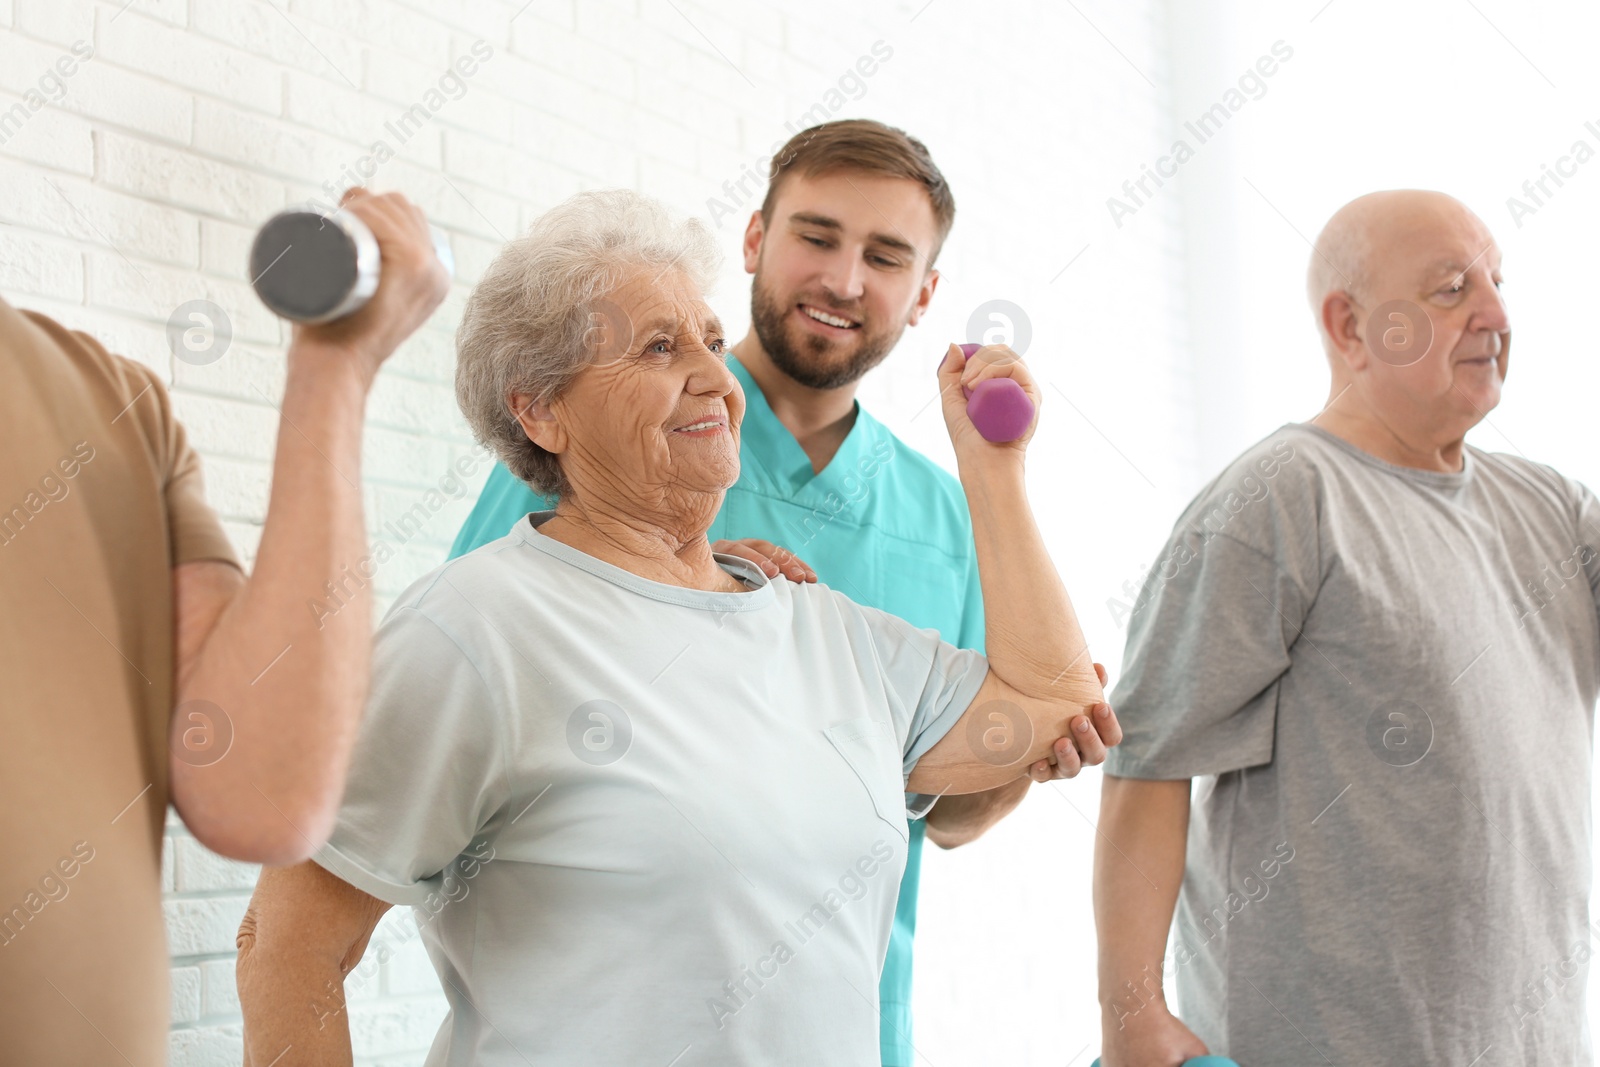 Photo of Care worker helping elderly woman to do exercise with dumbbell in hospital gym